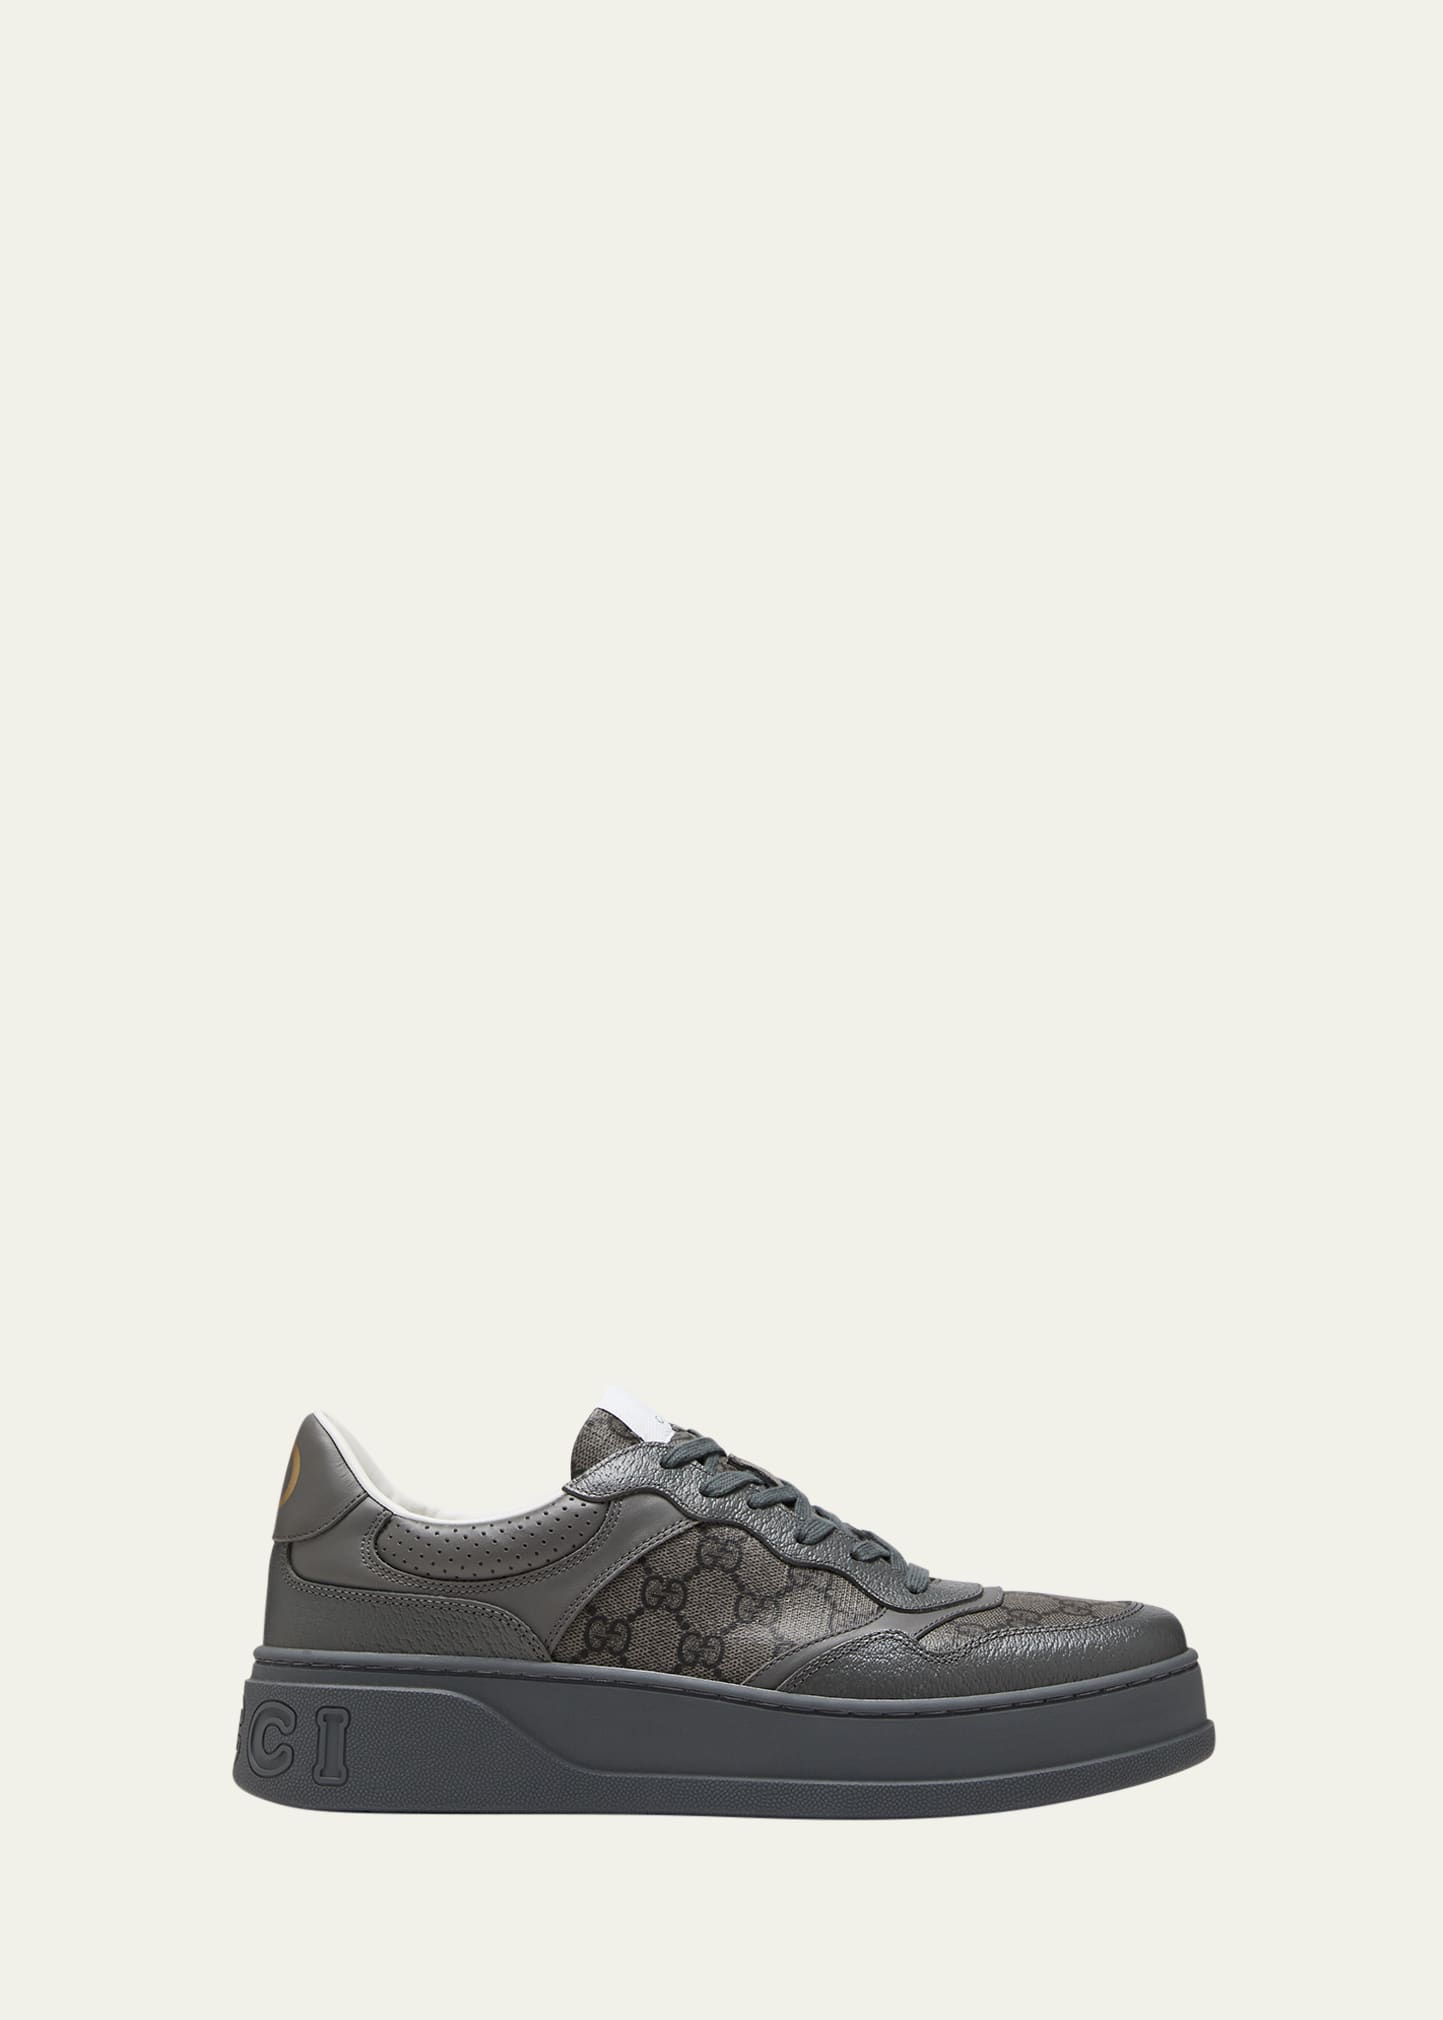 Gucci Men's Chunky B Low-top Sneakers - Grey Black - Size 10